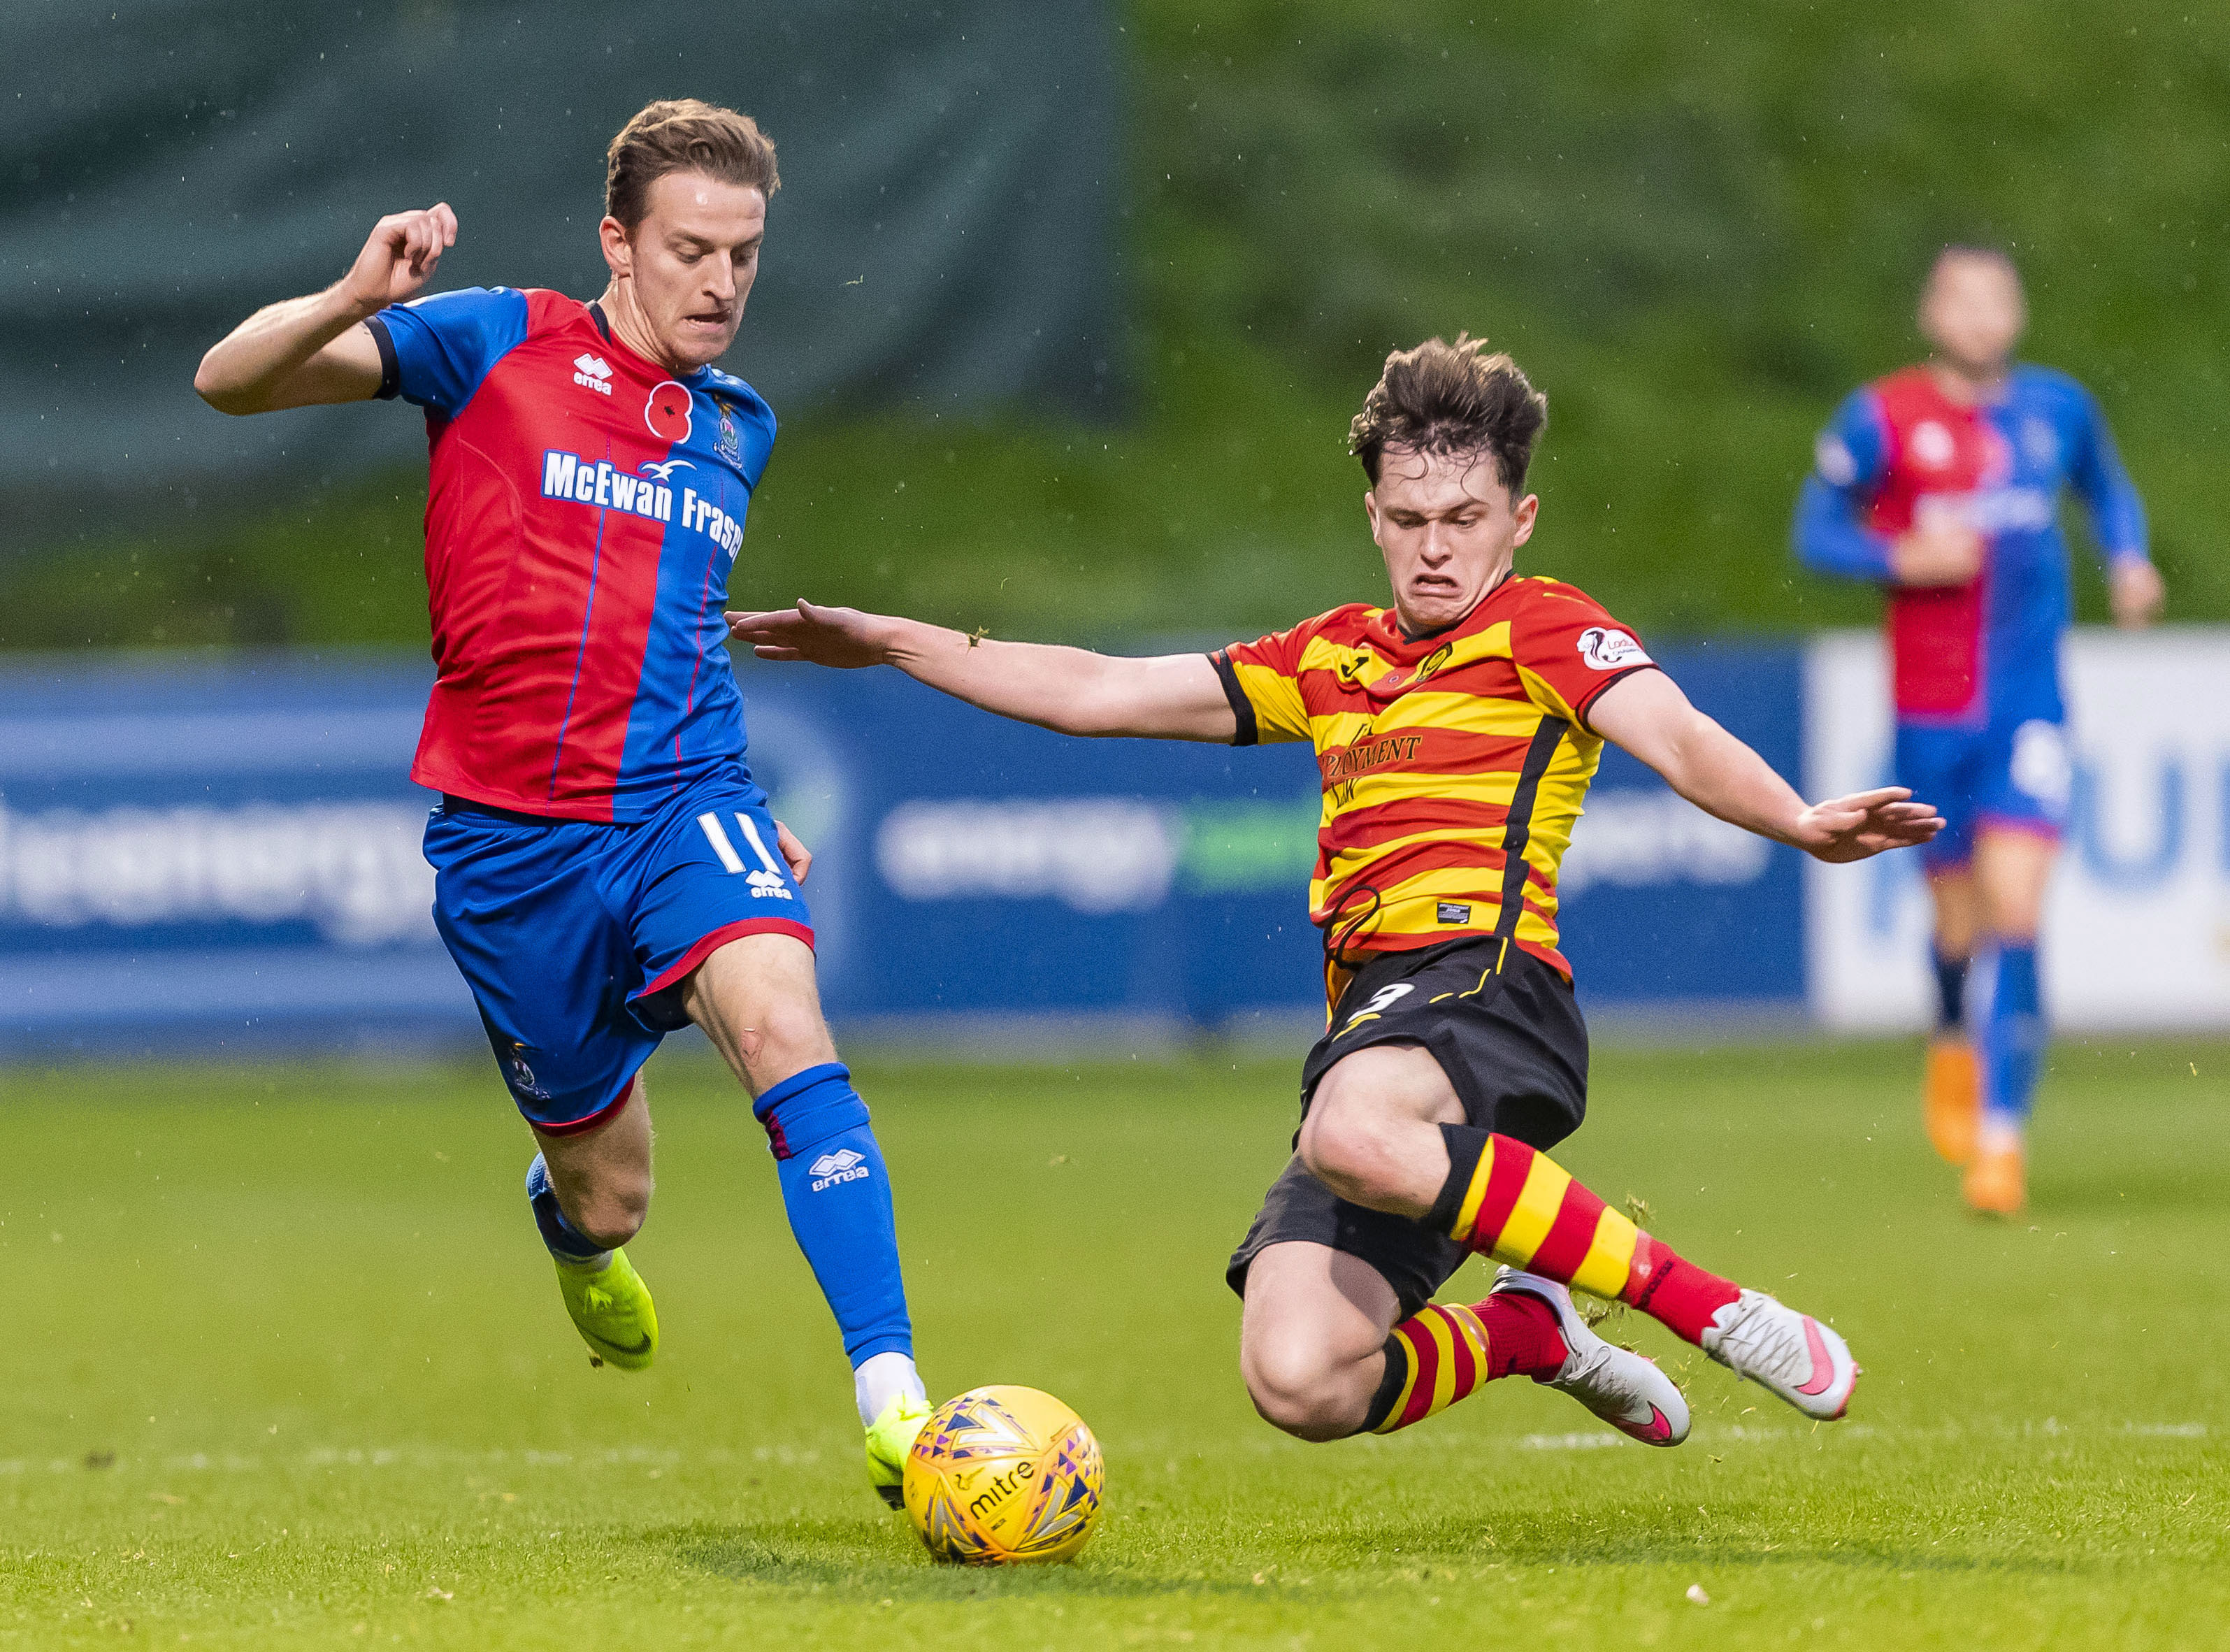 Tom Walsh returned from injury as a substitute for Caley Jags.